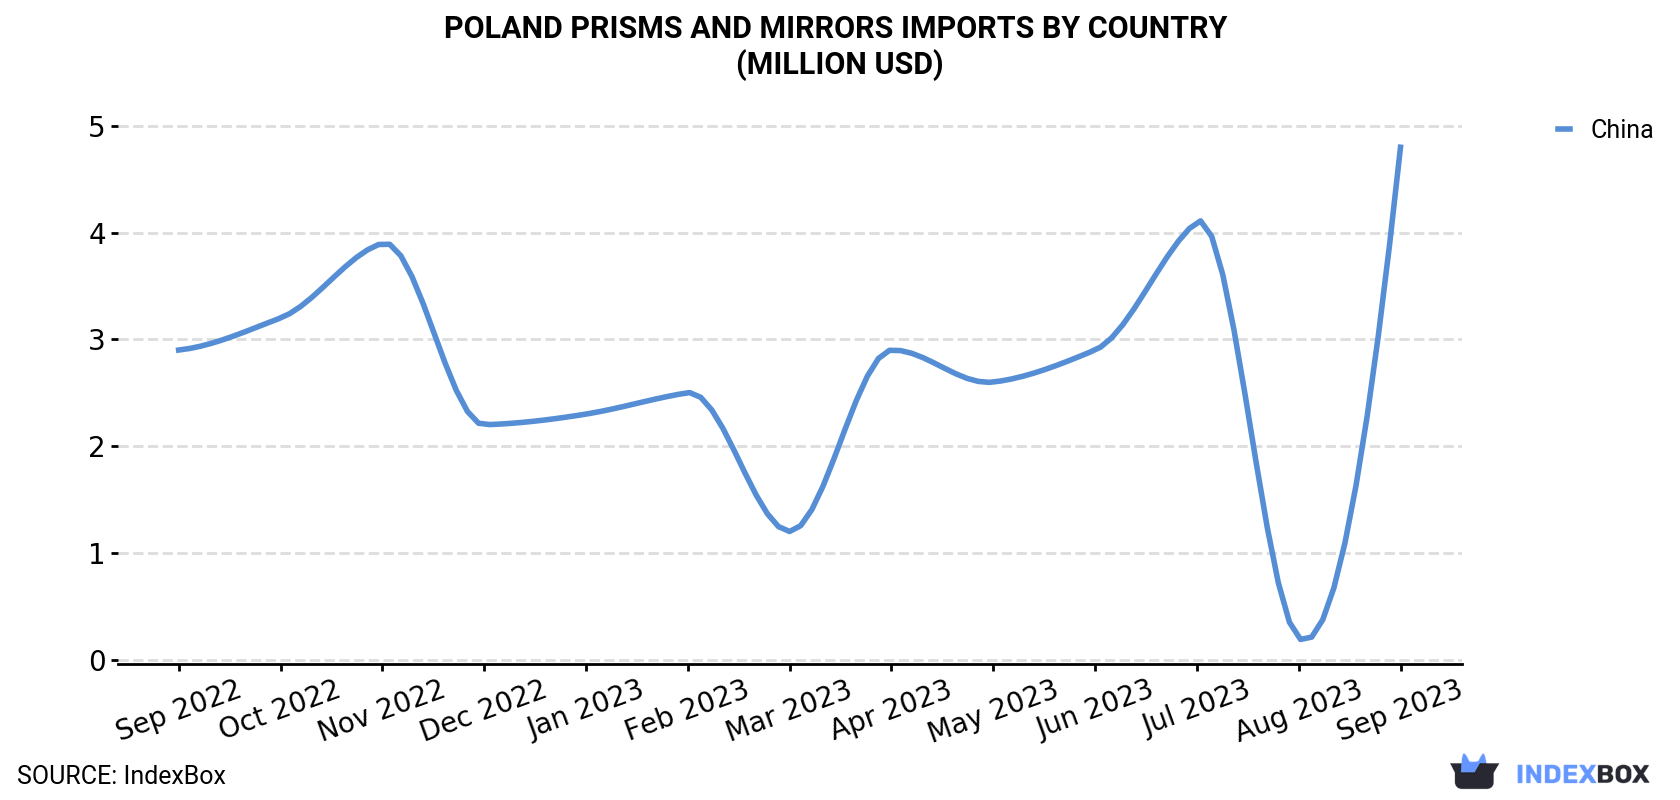 Poland Prisms And Mirrors Imports By Country (Million USD)